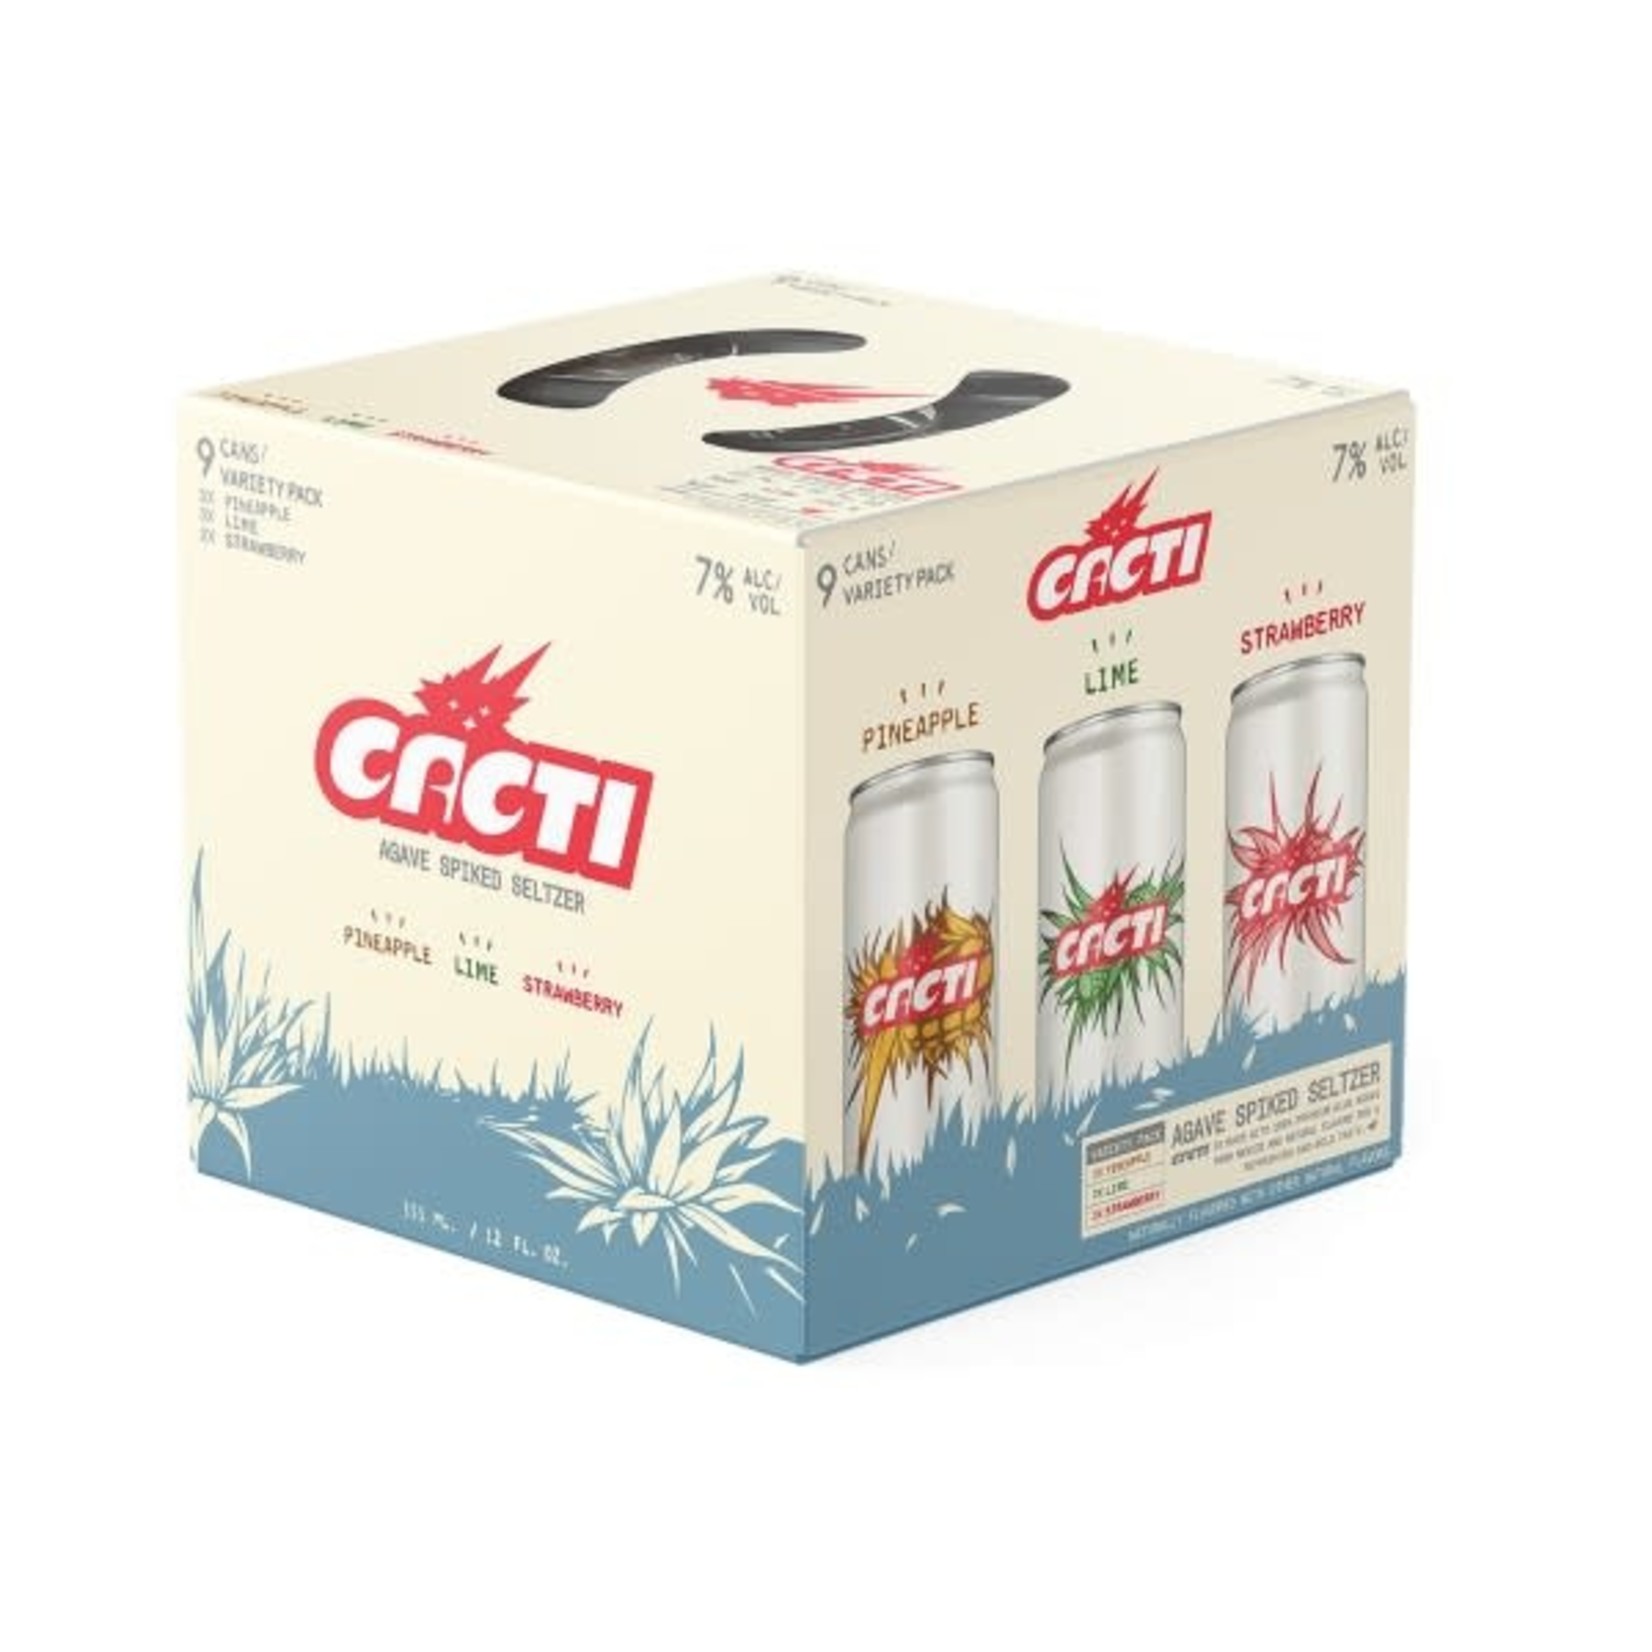 CACTI AGAVE SPIKED SELTZER 9PK 12OZ CAN